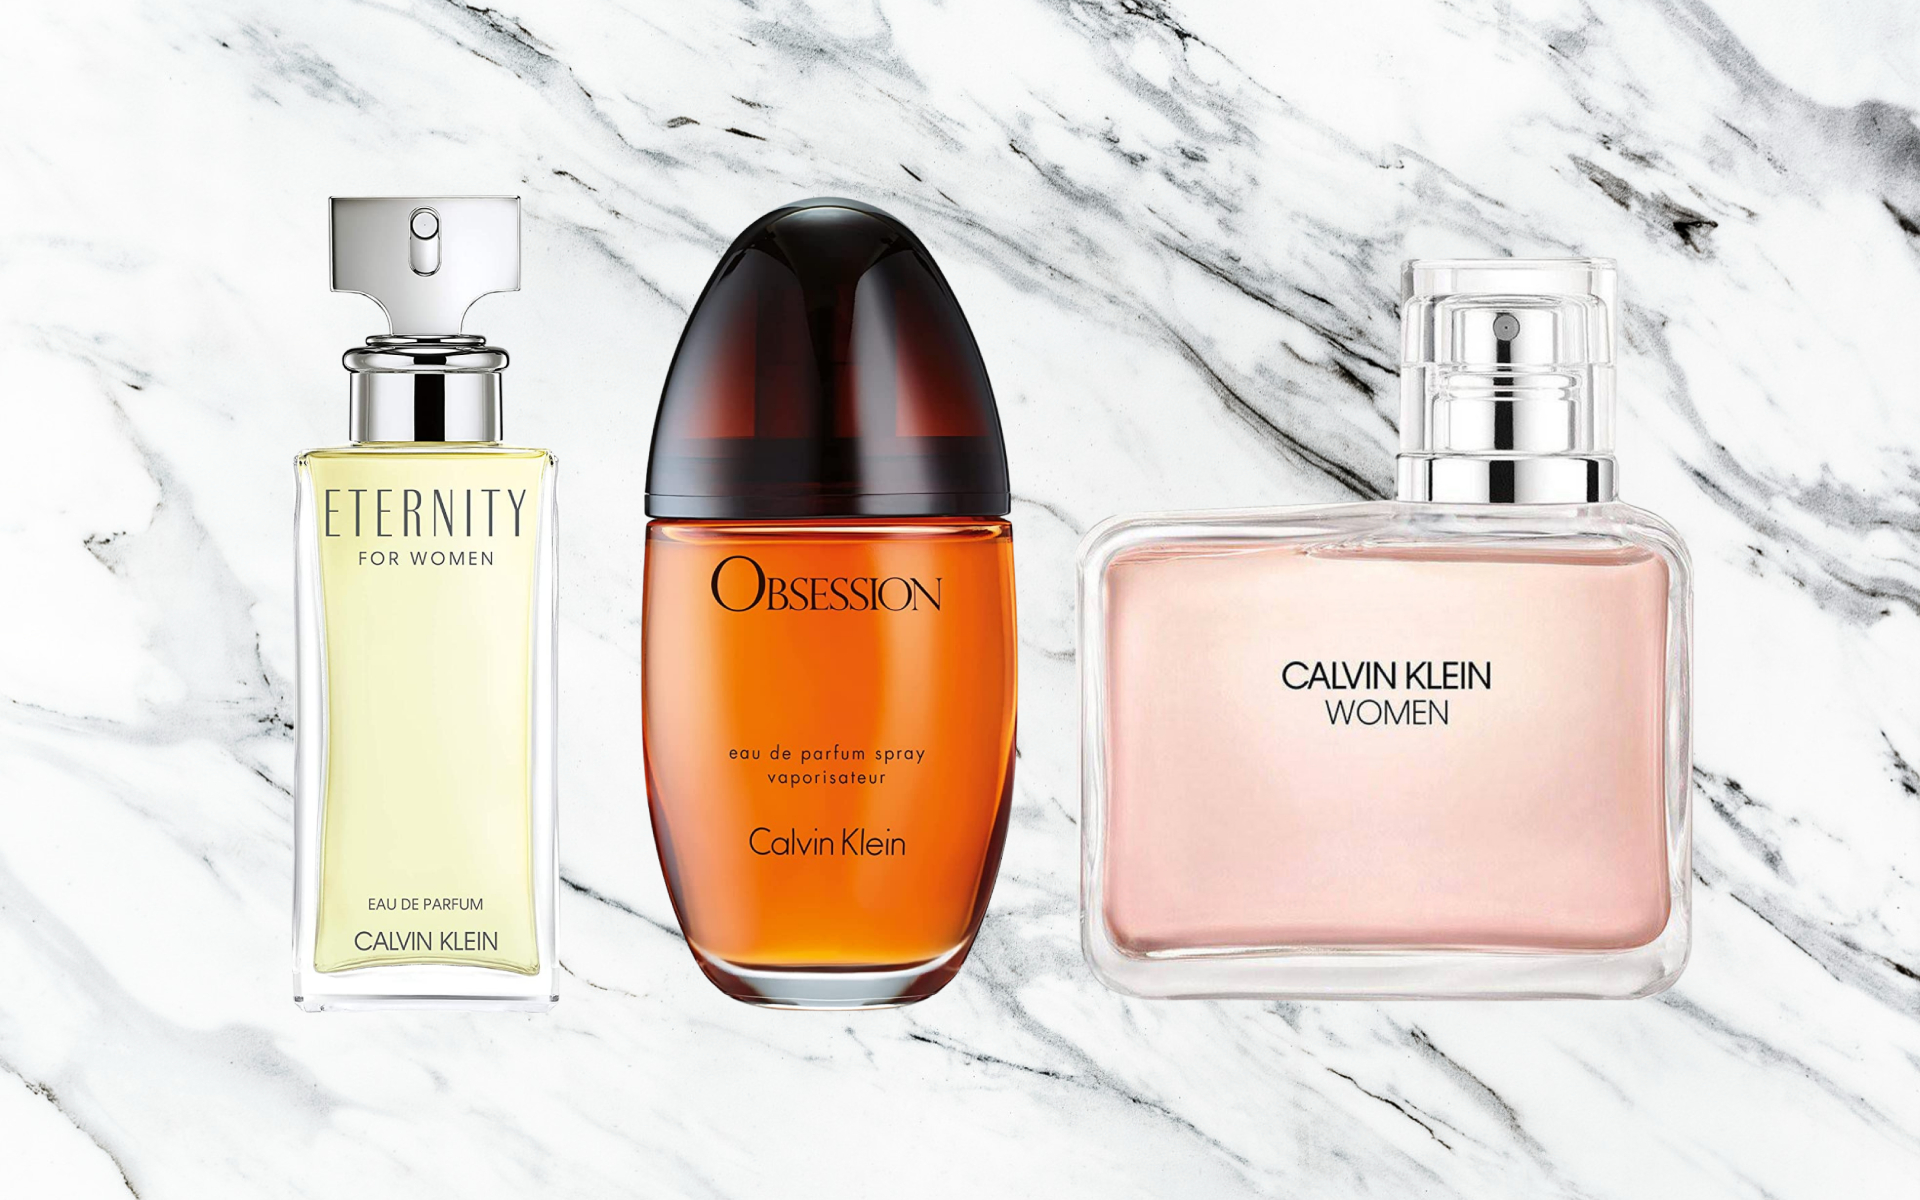 7 Best Calvin Klein Perfumes for Women (Tested & Reviewed)